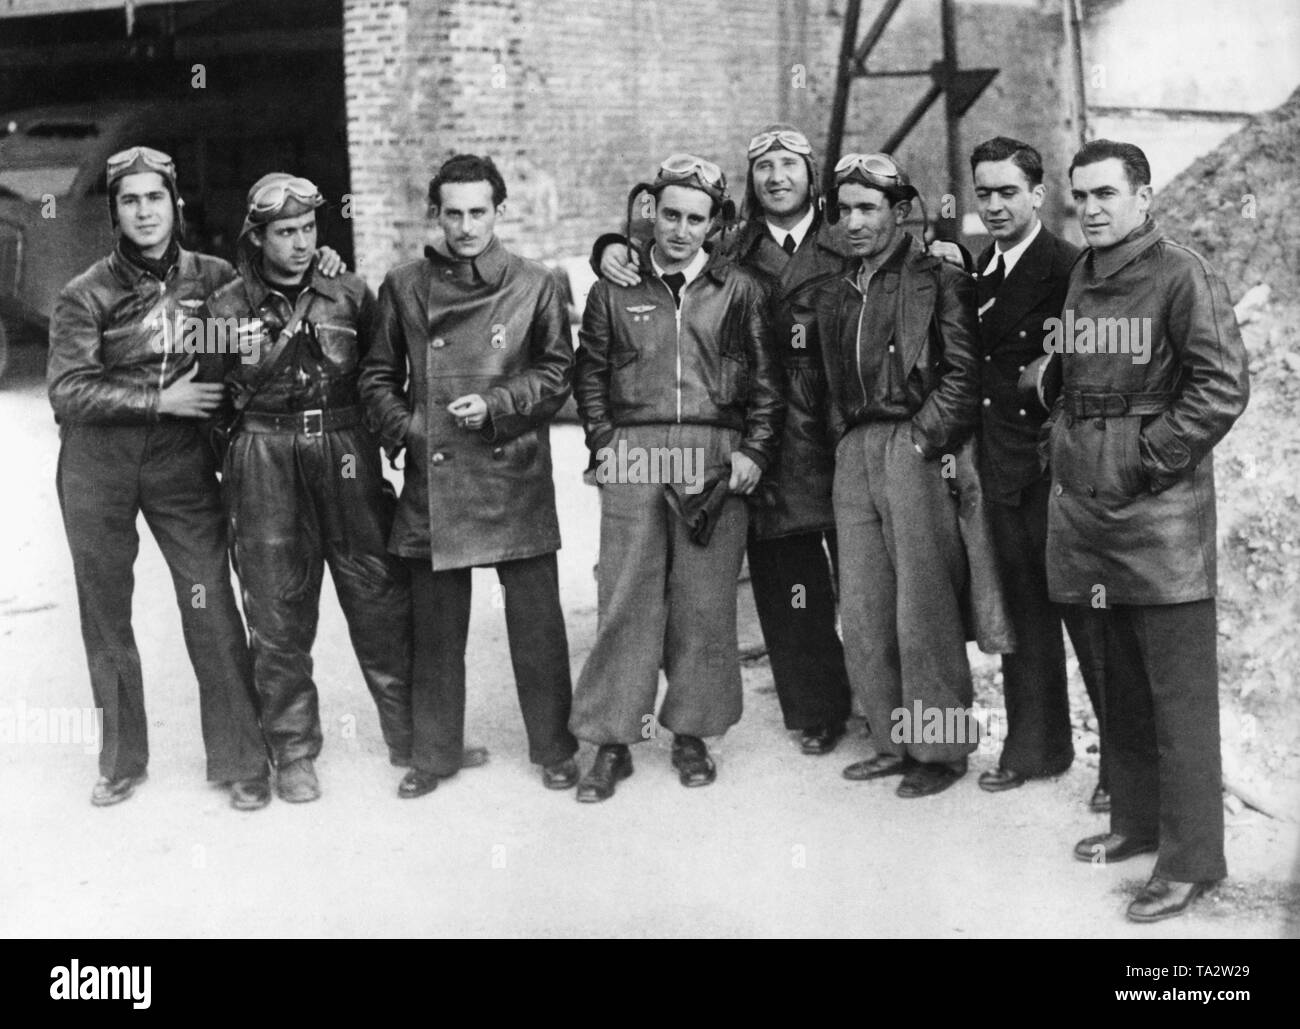 Photo of a group of fighter pilots of the government troops in uniform or flight suit (May 6, 1937 ) after the air attack and the sinking of the Spanish national battleship 'Espana' off the coast of Santander on 30 April, 1937. Stock Photo